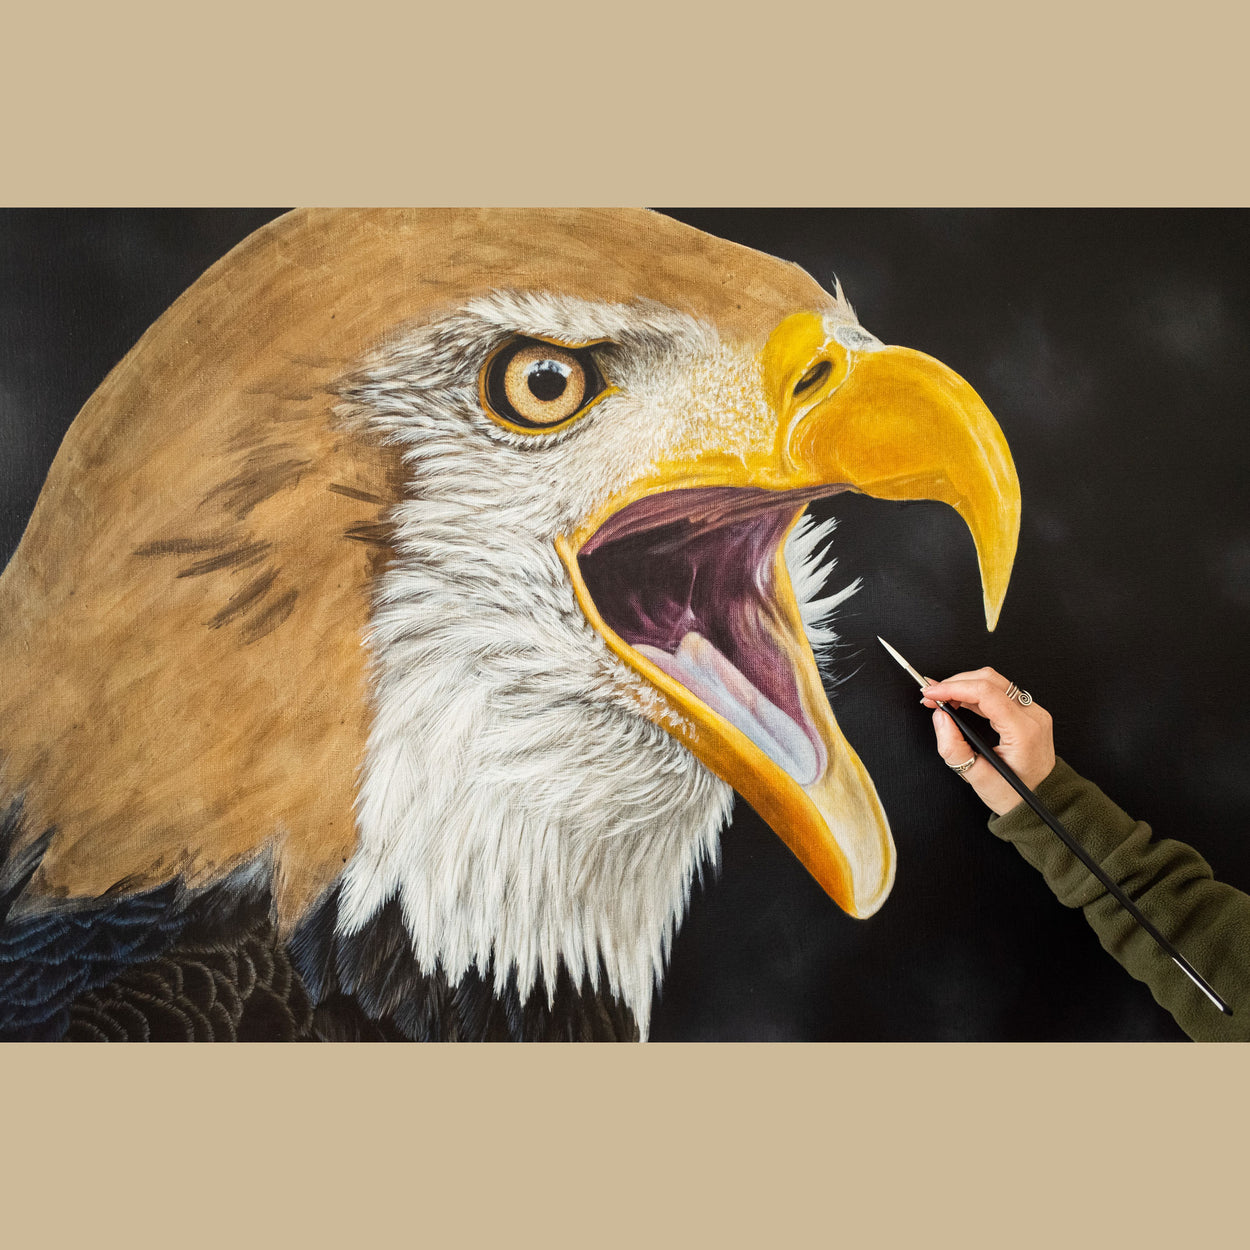 Image showing a hand and arm holding a paintbrush over a part-complete large painting of a bald eagle portrait